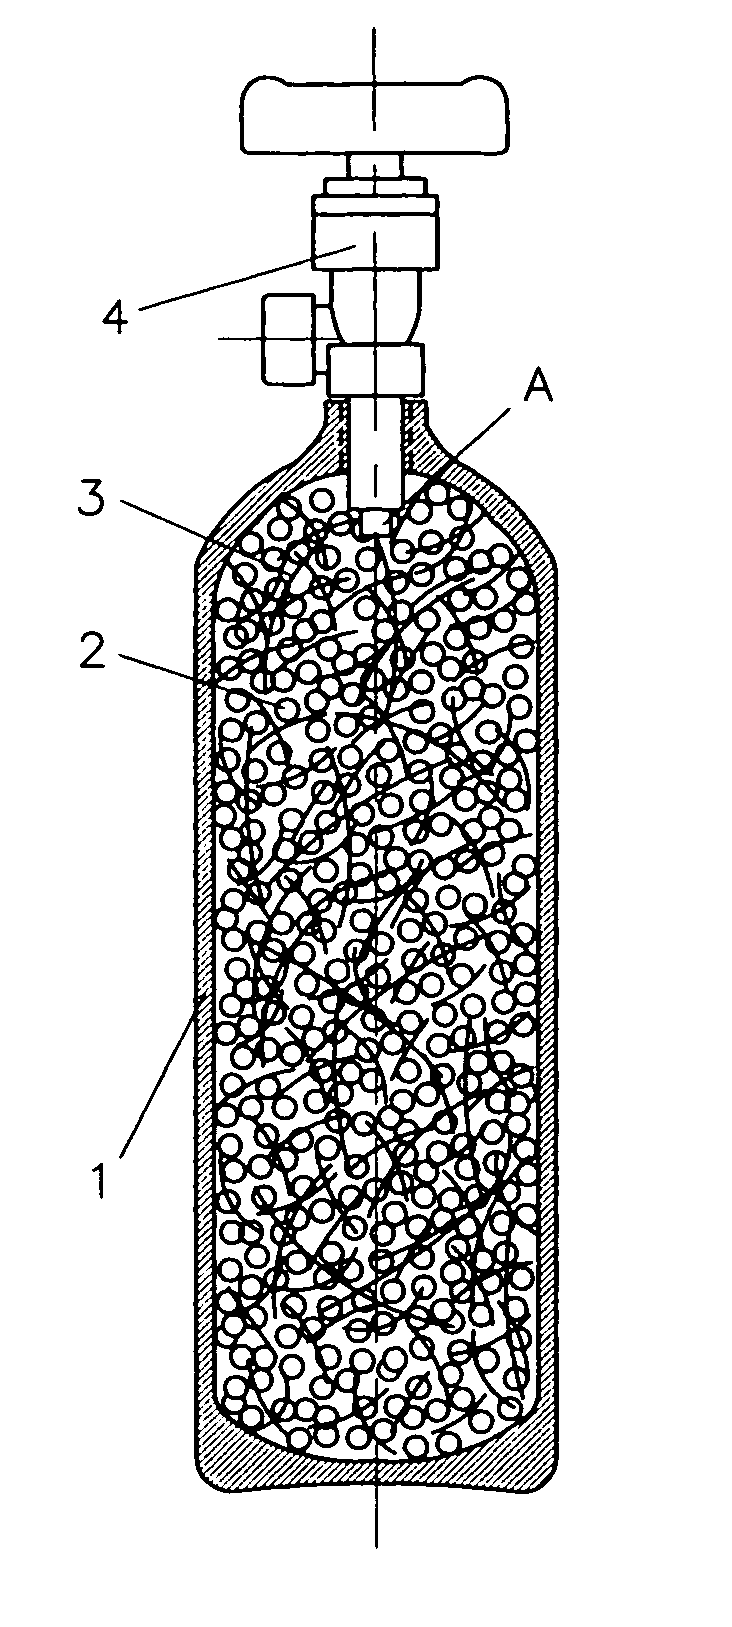 Hydrogen storage container and mixture therein